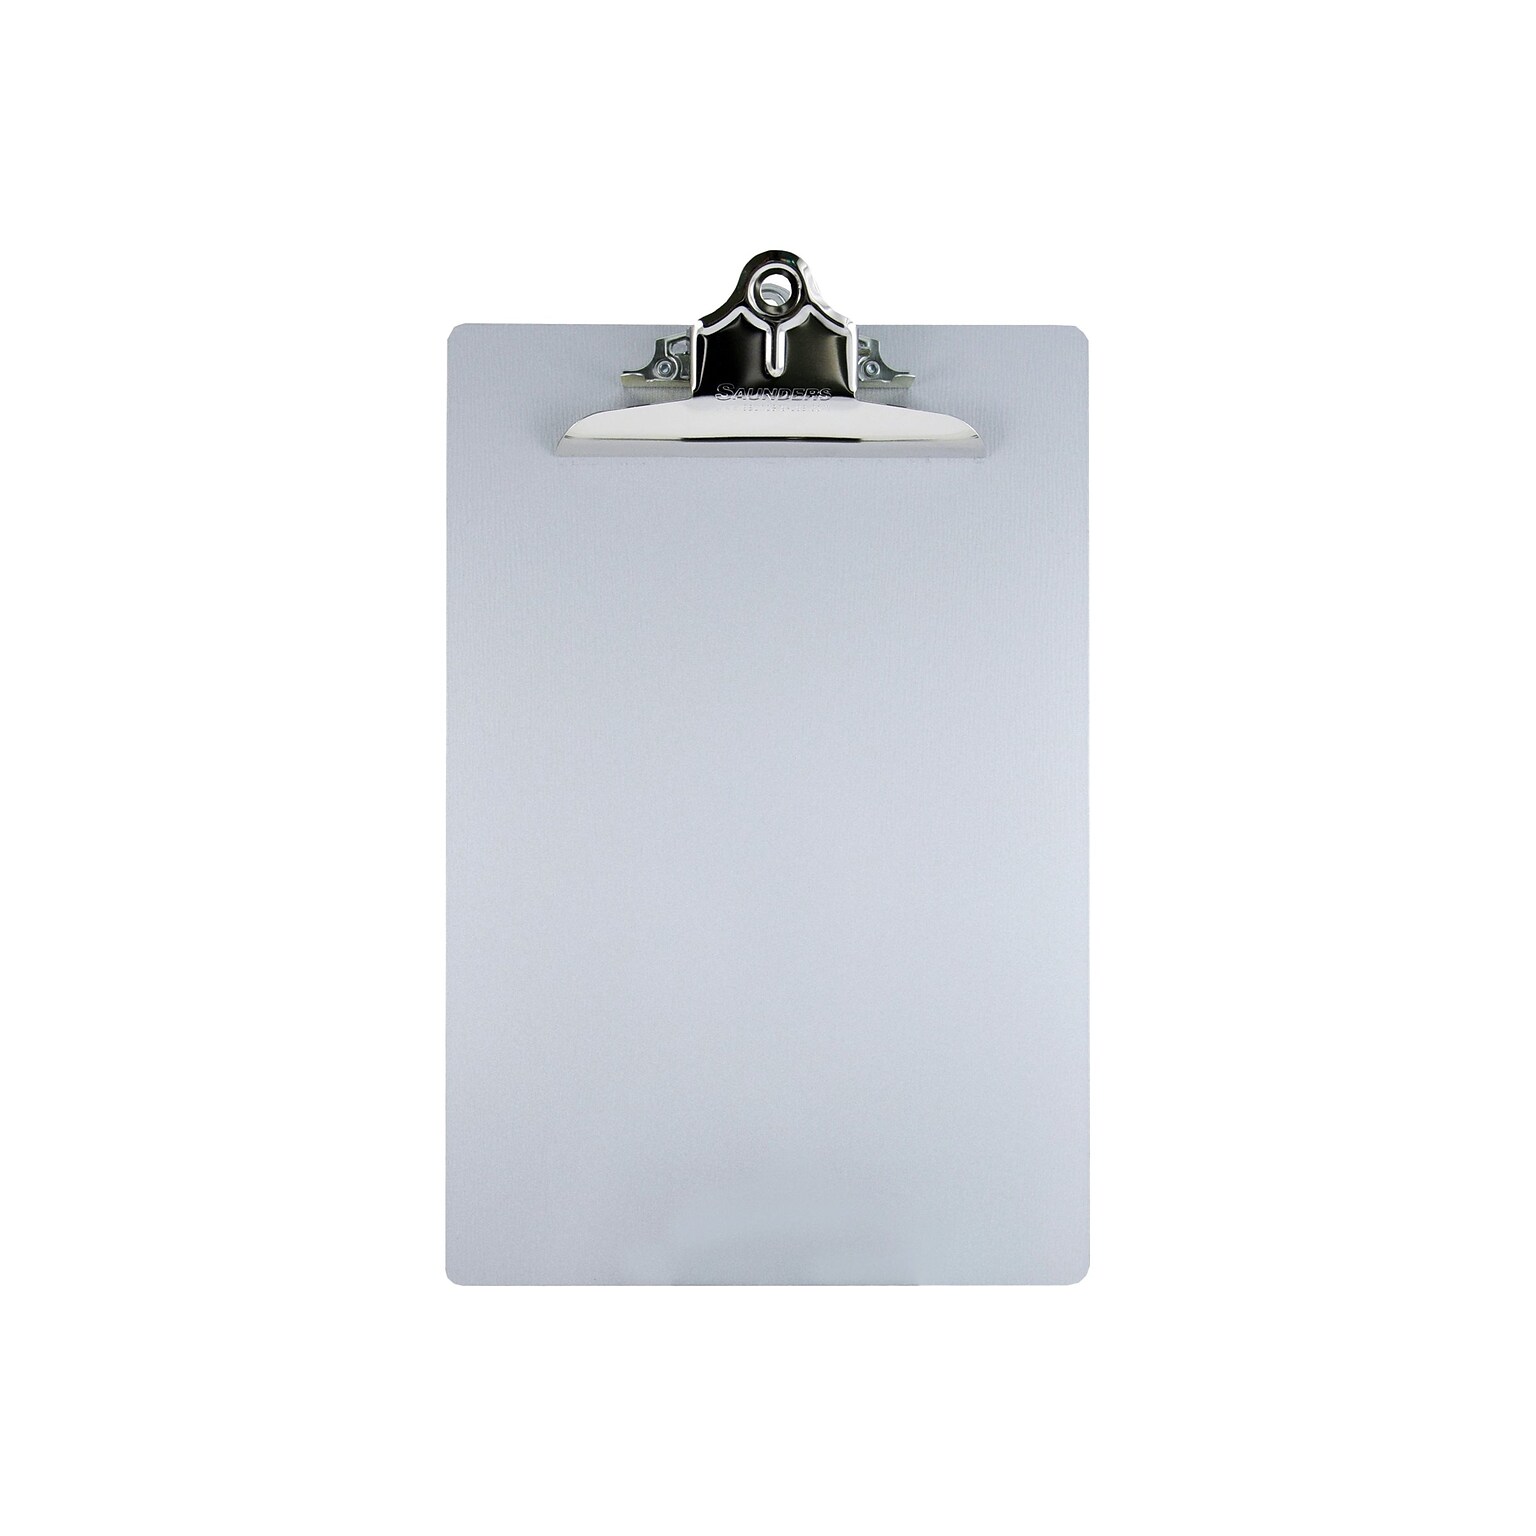 Saunders Aluminum Clipboard, Letter Size, Silver (22517)